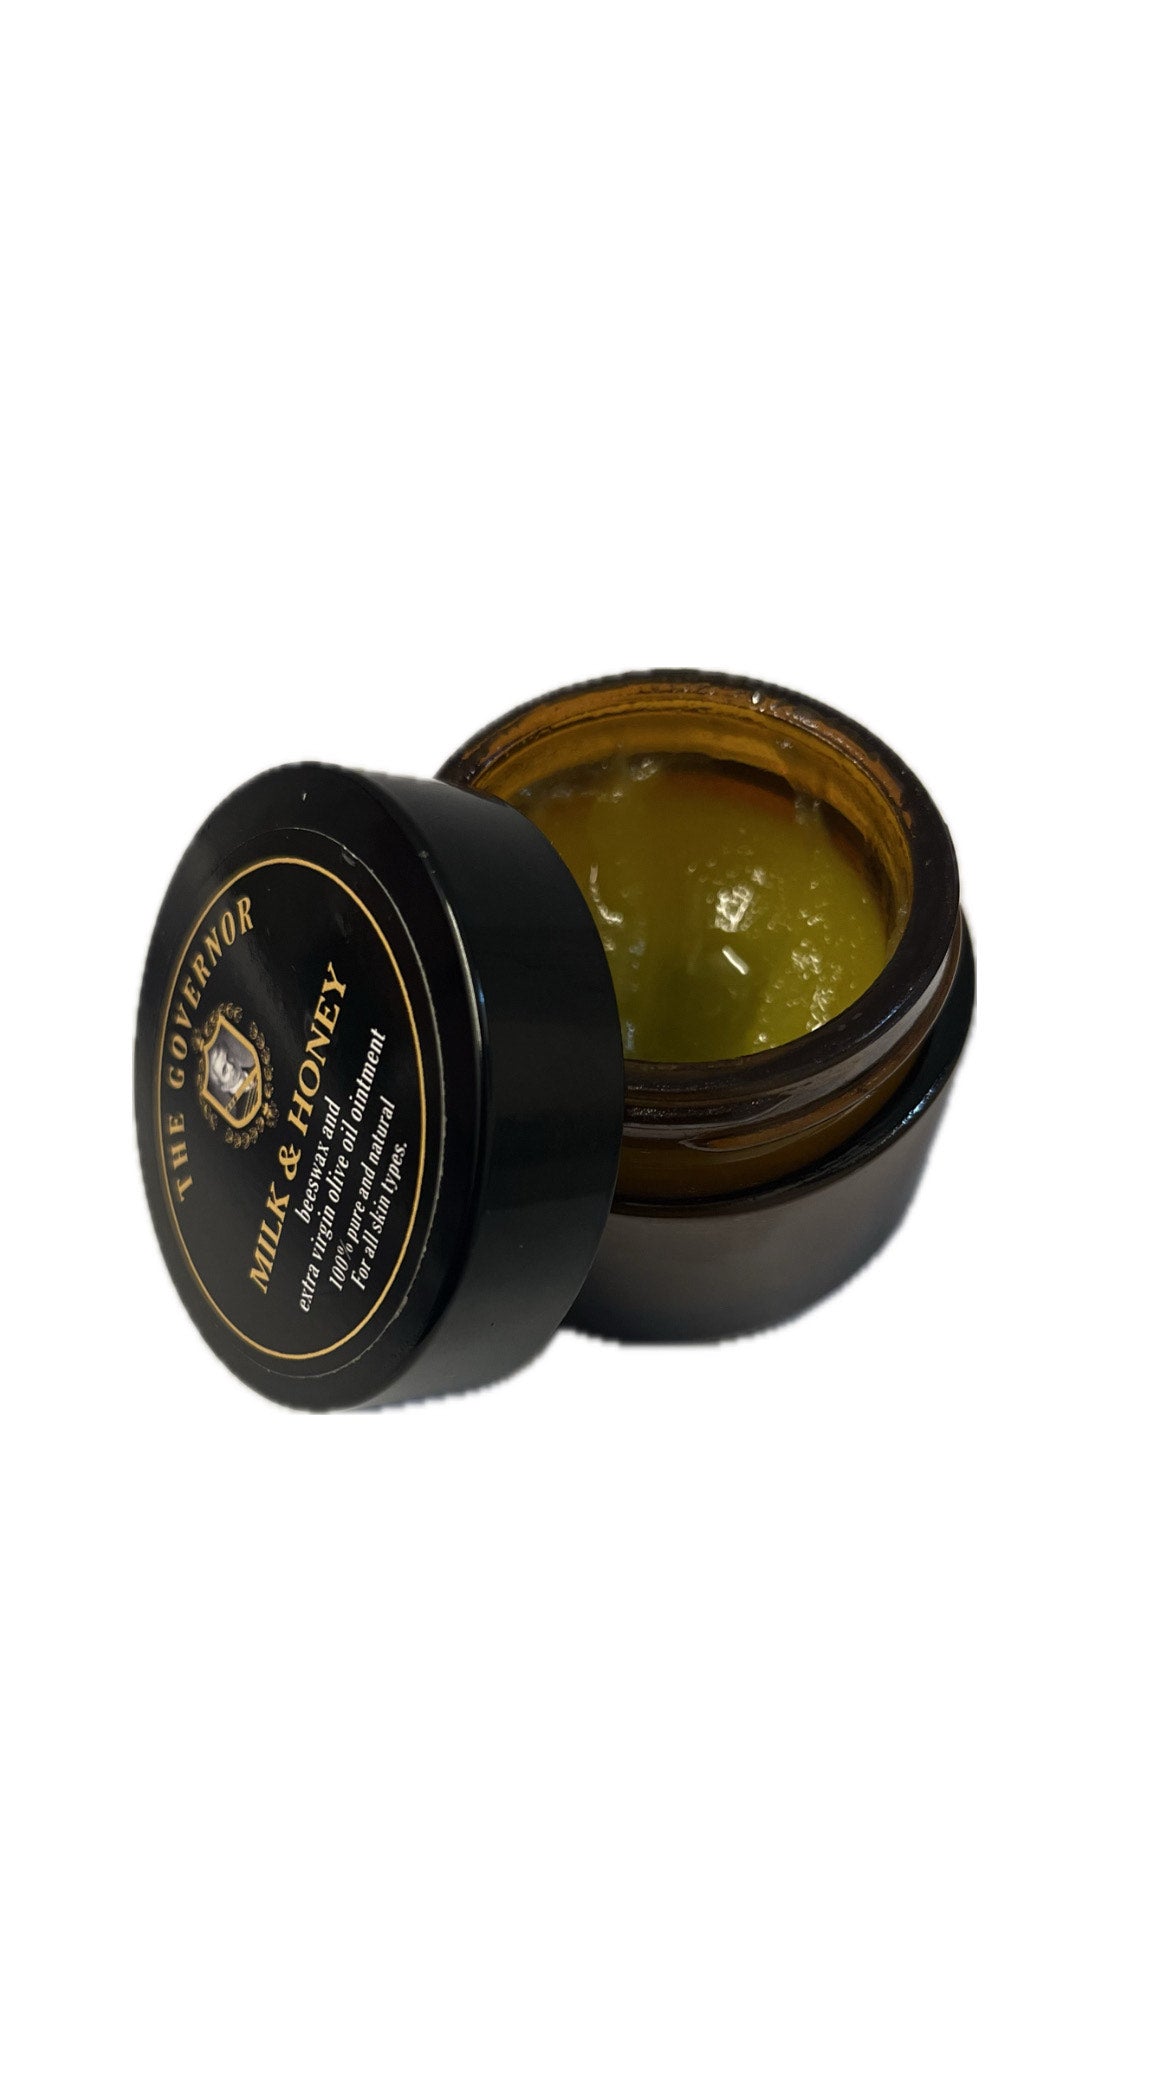 The Governor Olive Oil and Beeswax Ointment